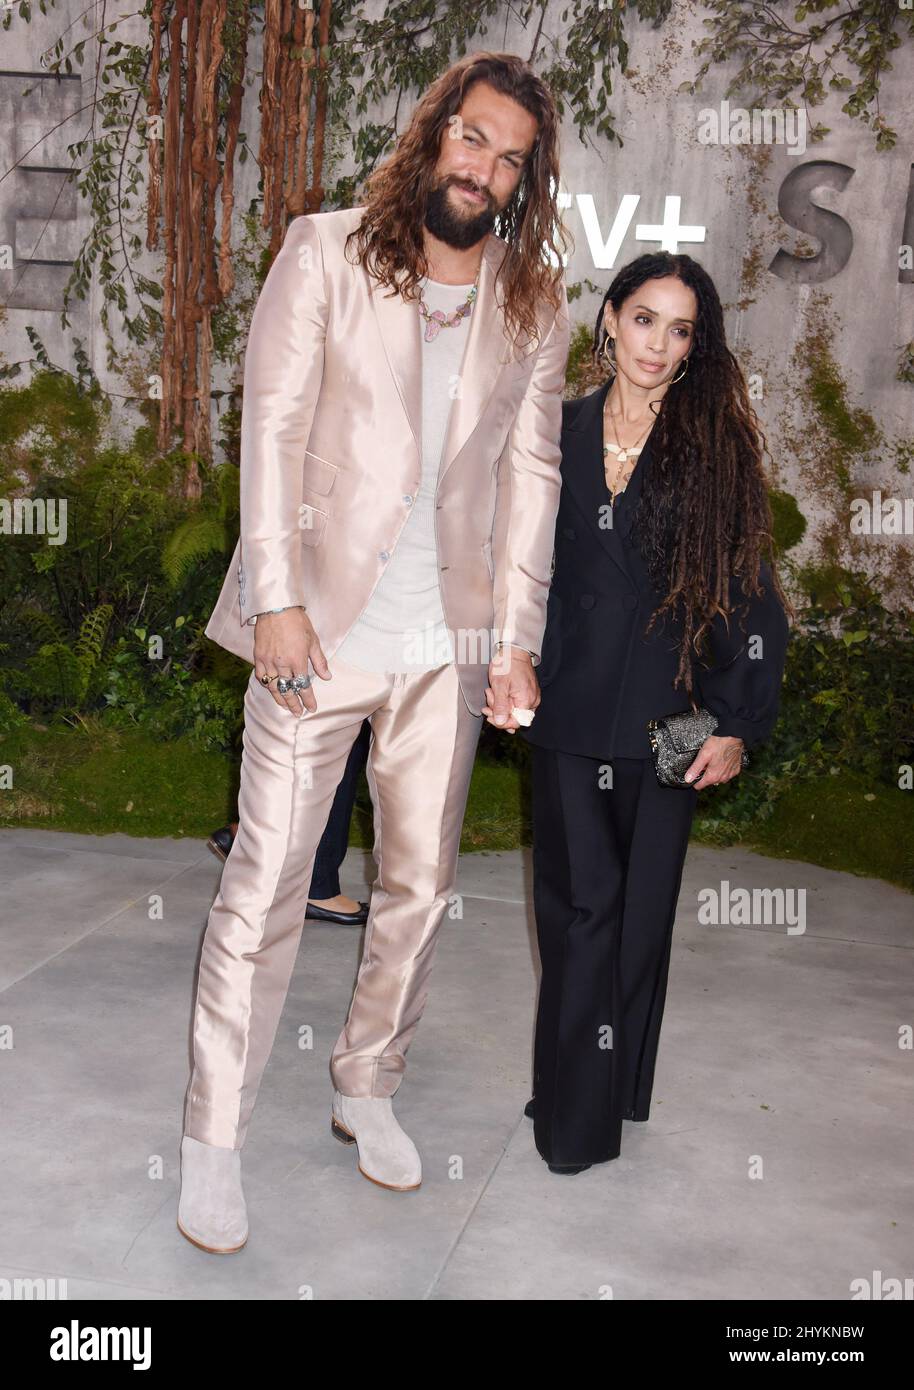 Jason Mamoa and Lisa Bonet at Apple TV+'s 'See' World Premiere held at the Regency Village Theatre on October 21, 2019 in Westwood, CA. Stock Photo